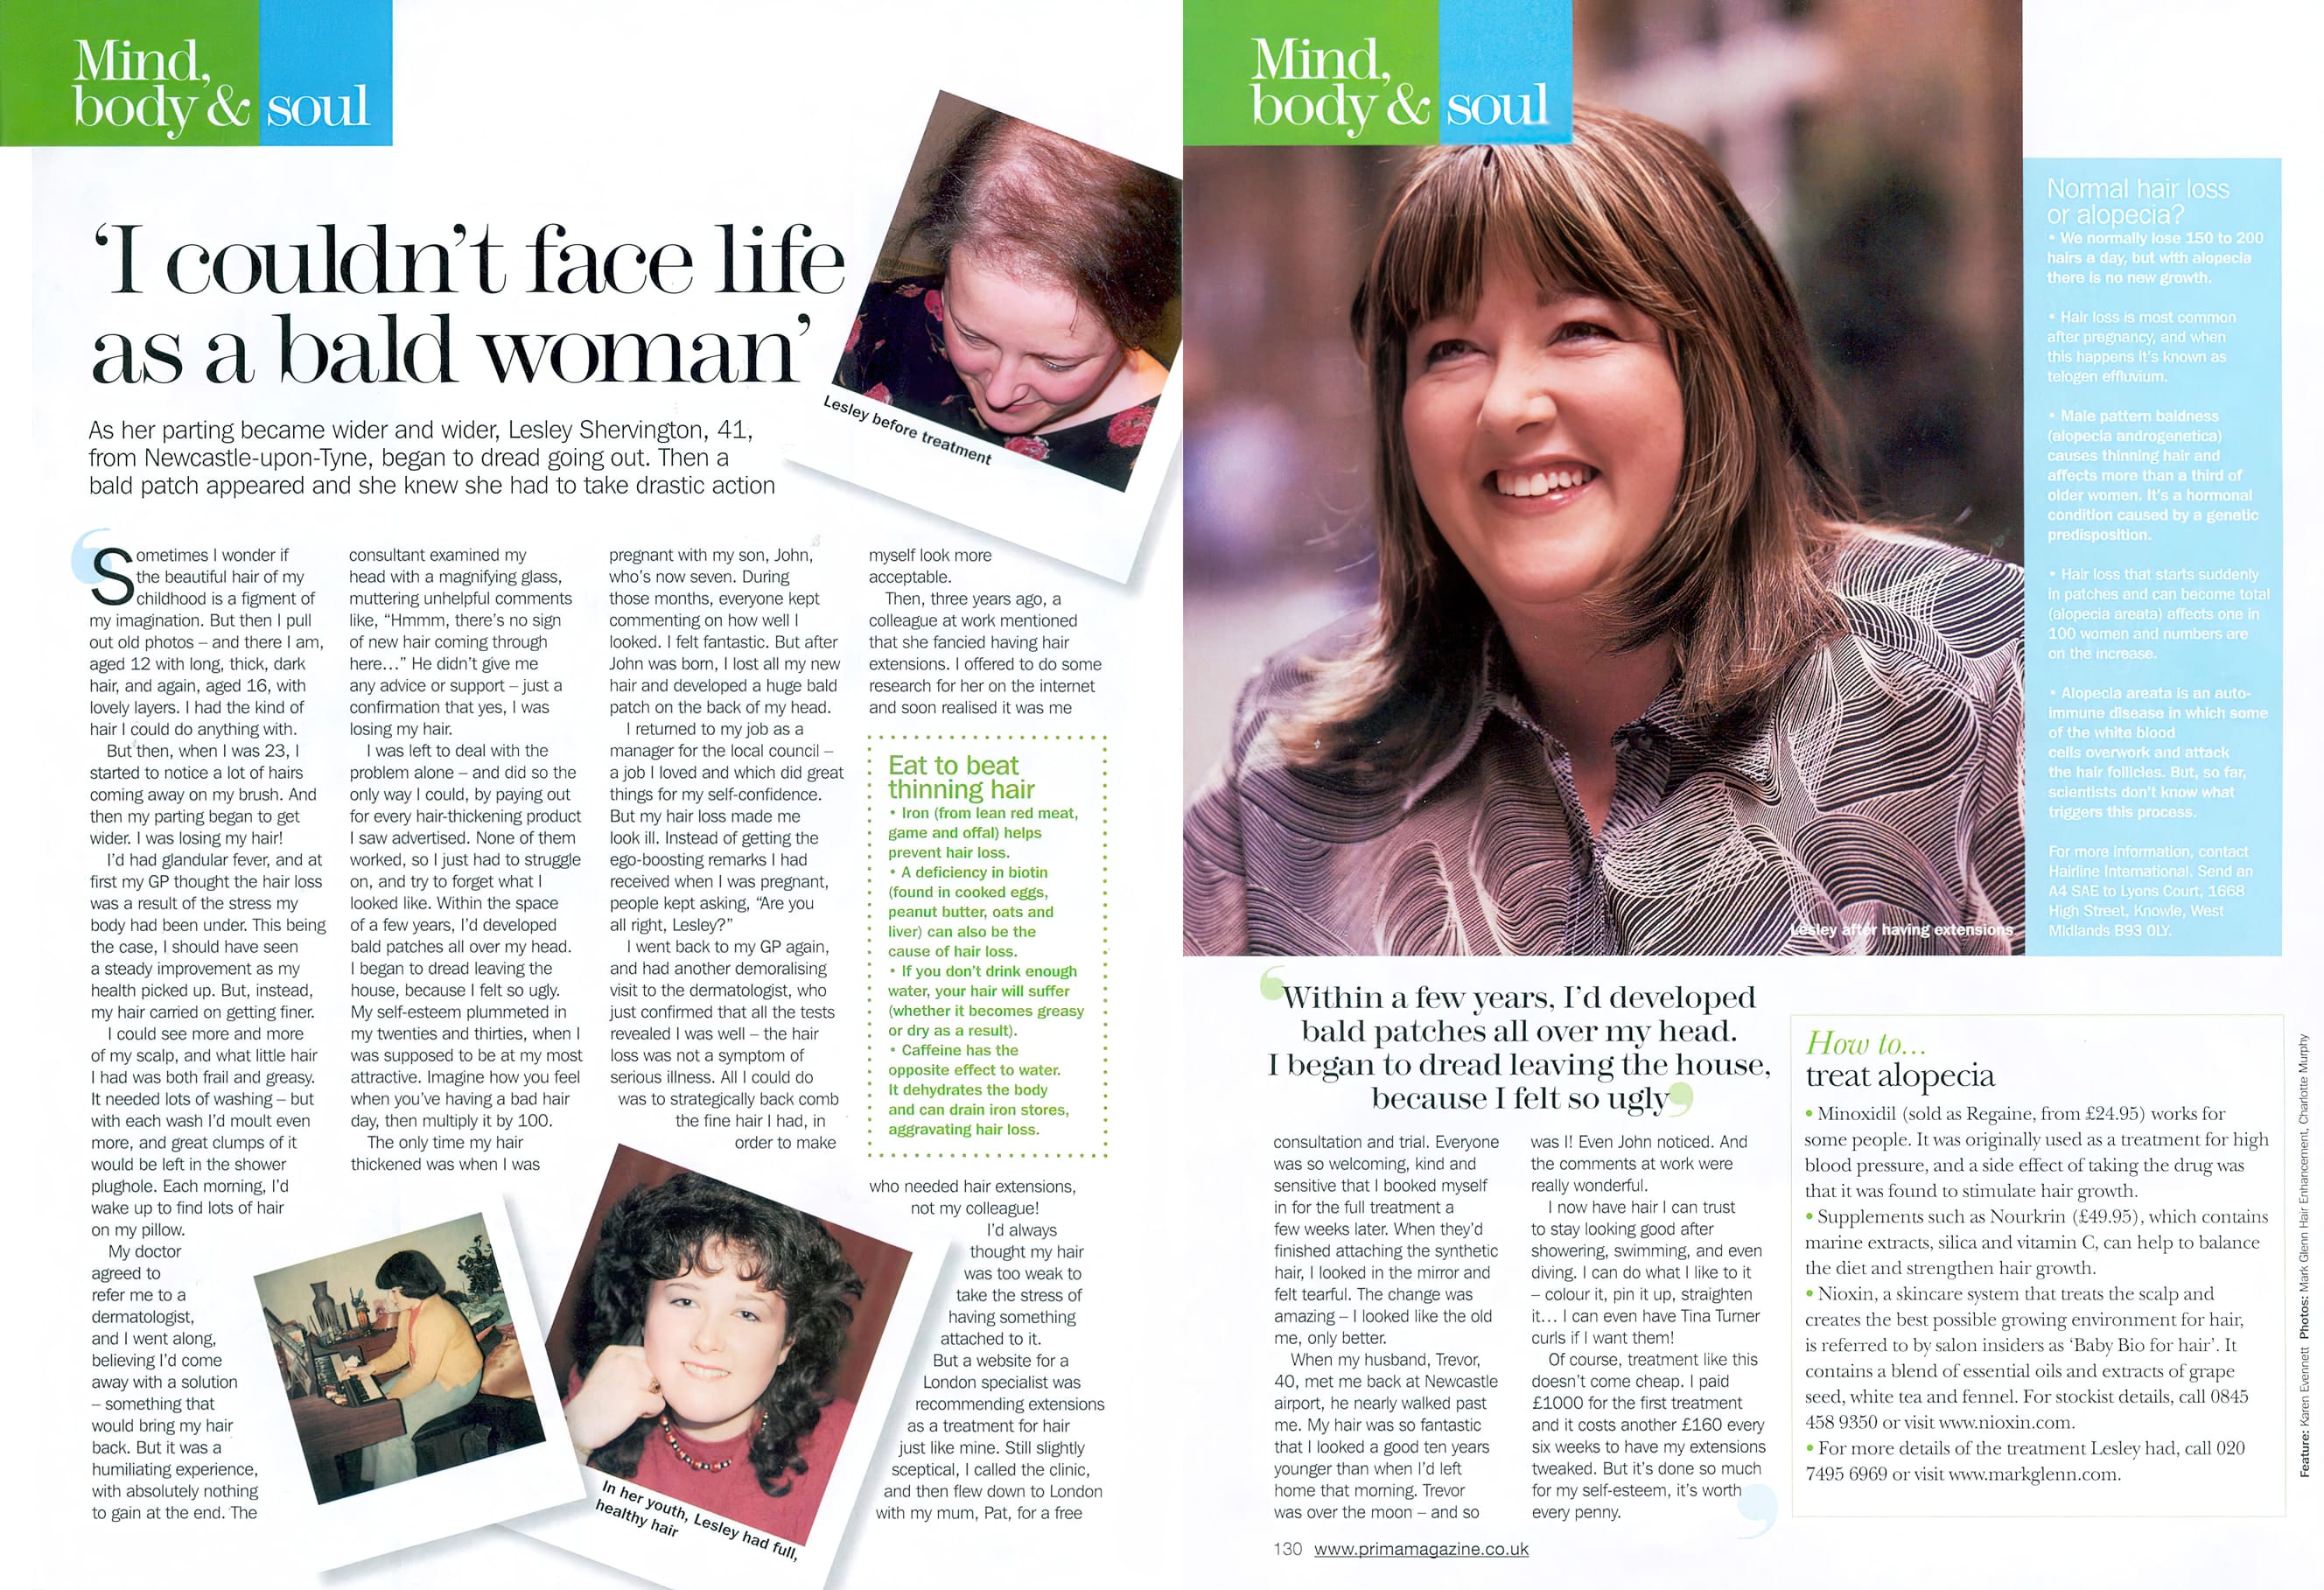 'I couldn't face life as a bald woman' - Alopecia - Mark Glenn's life-changing solution in Prima Magazine